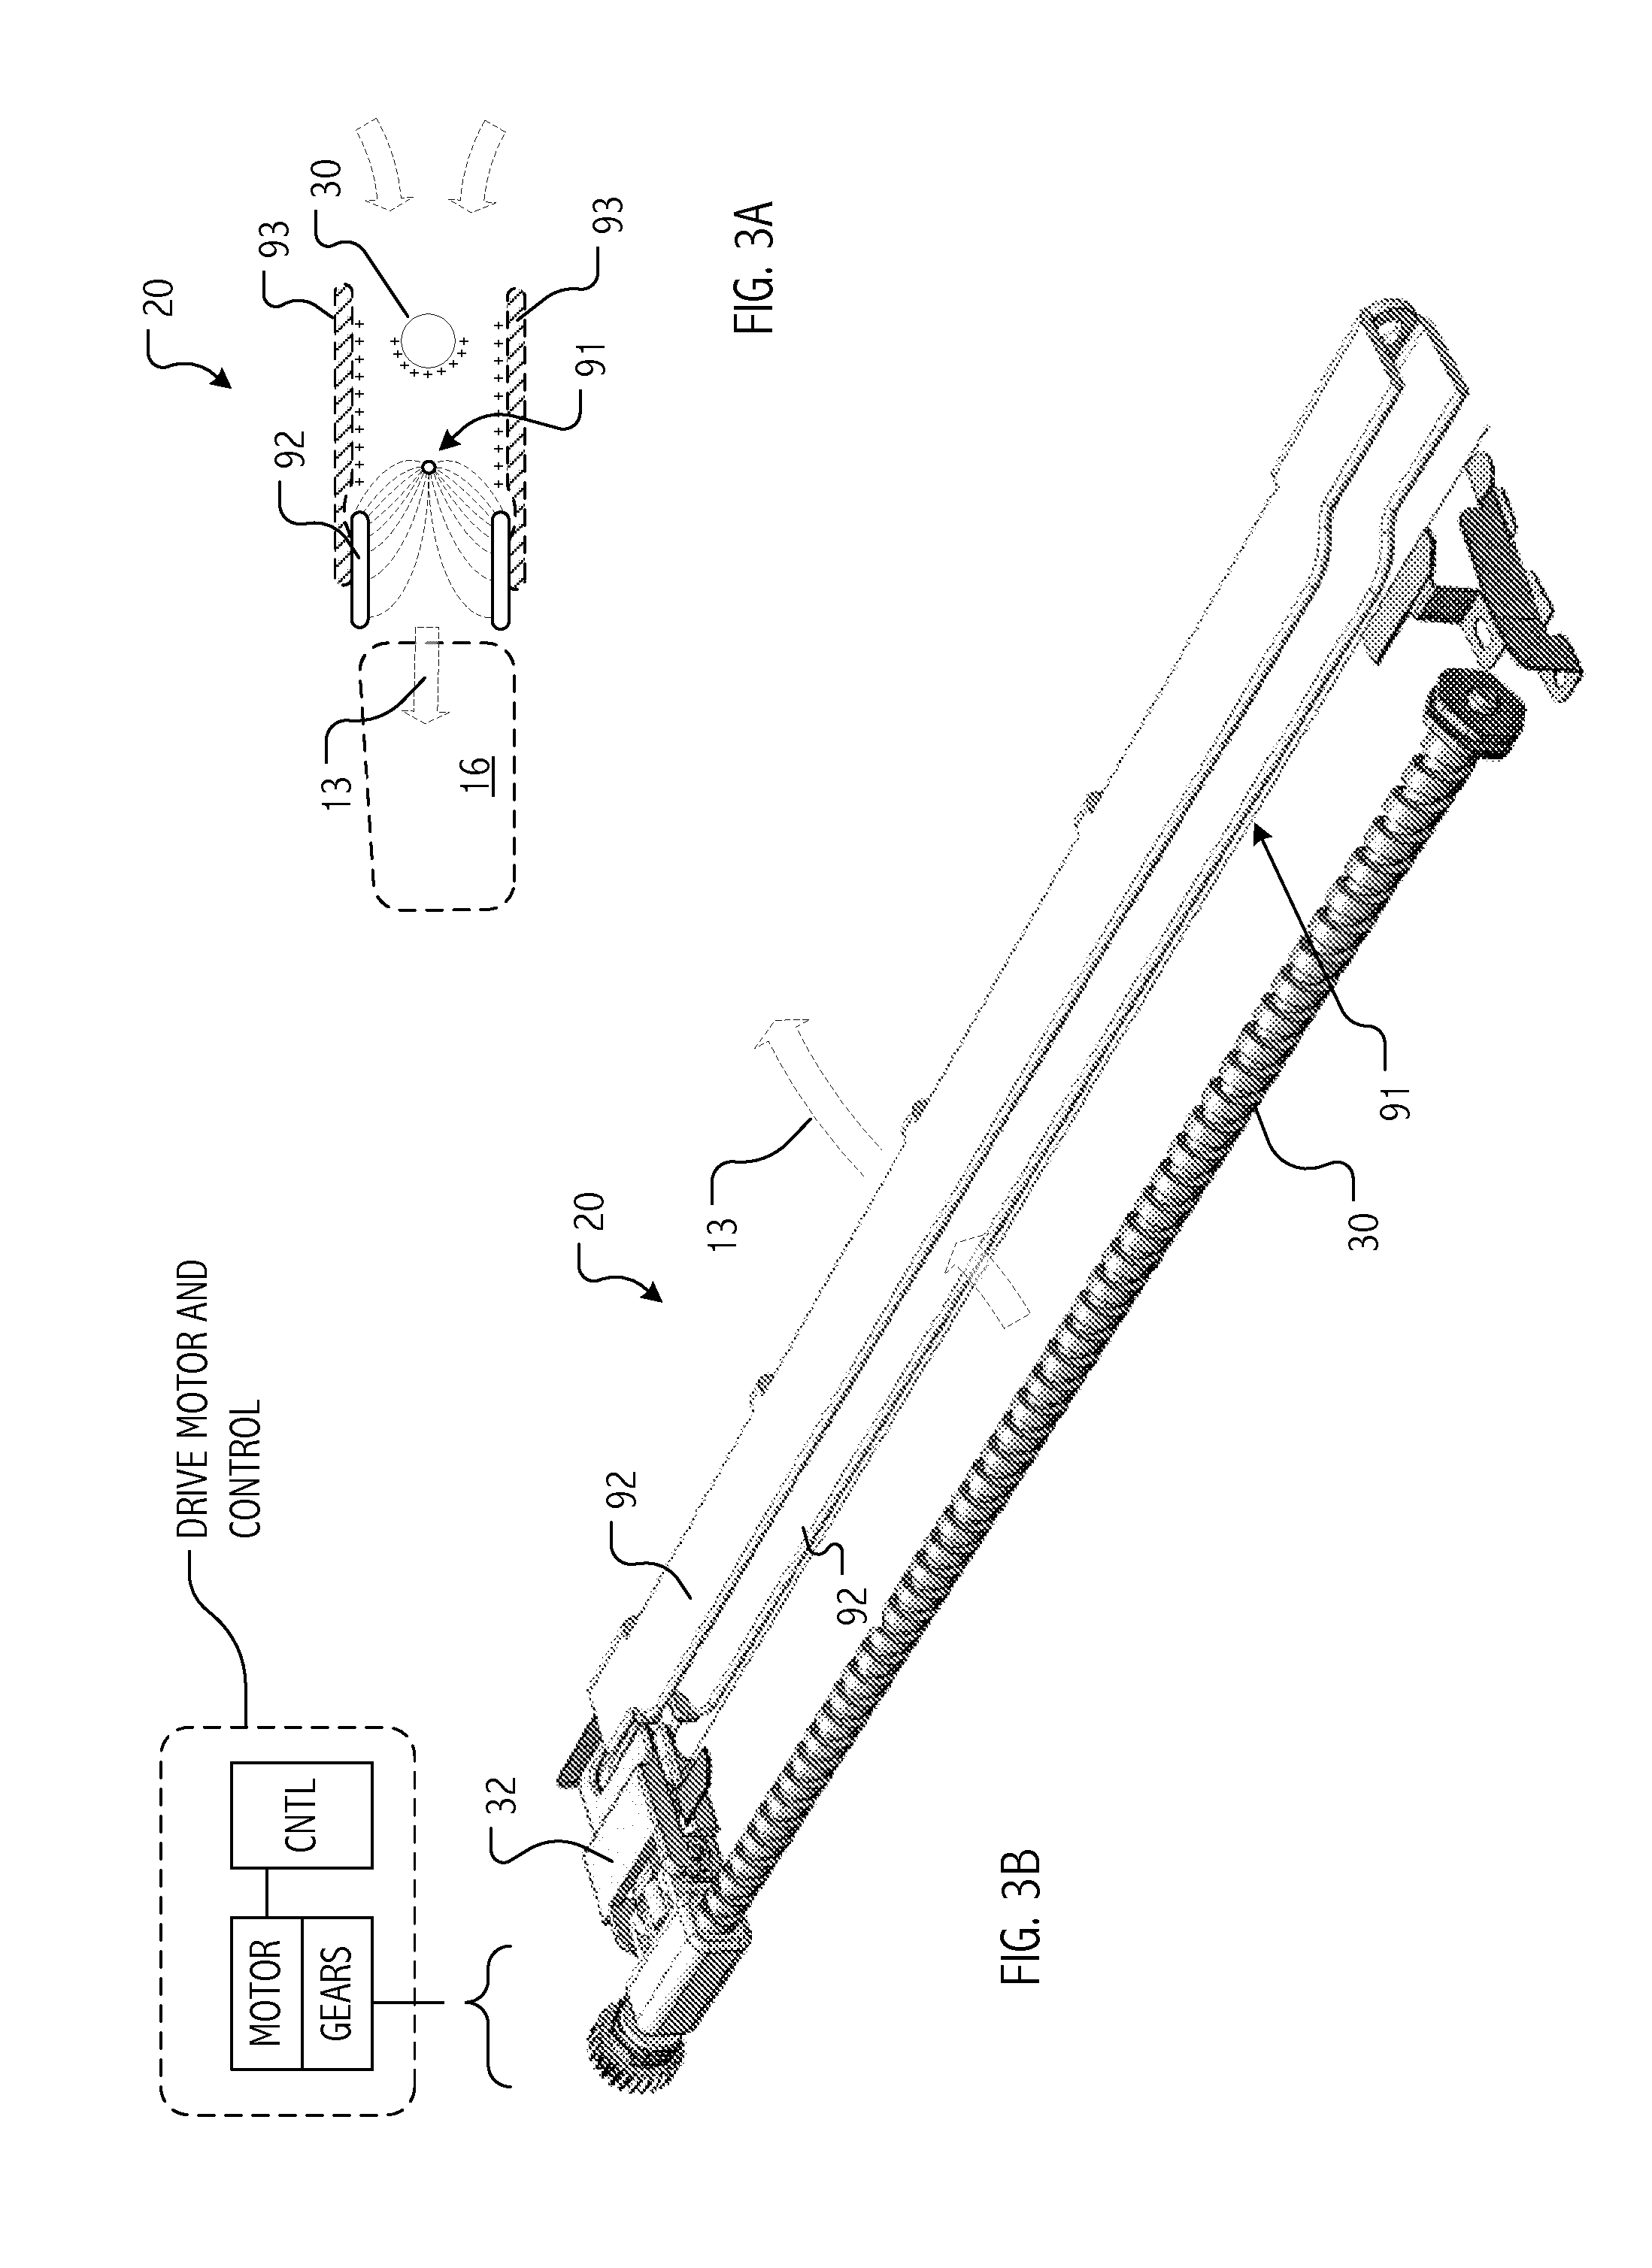 Electrohydrodynamic (EHD) fluid mover with collector electrode leading surface shaping for spatially selective field reduction